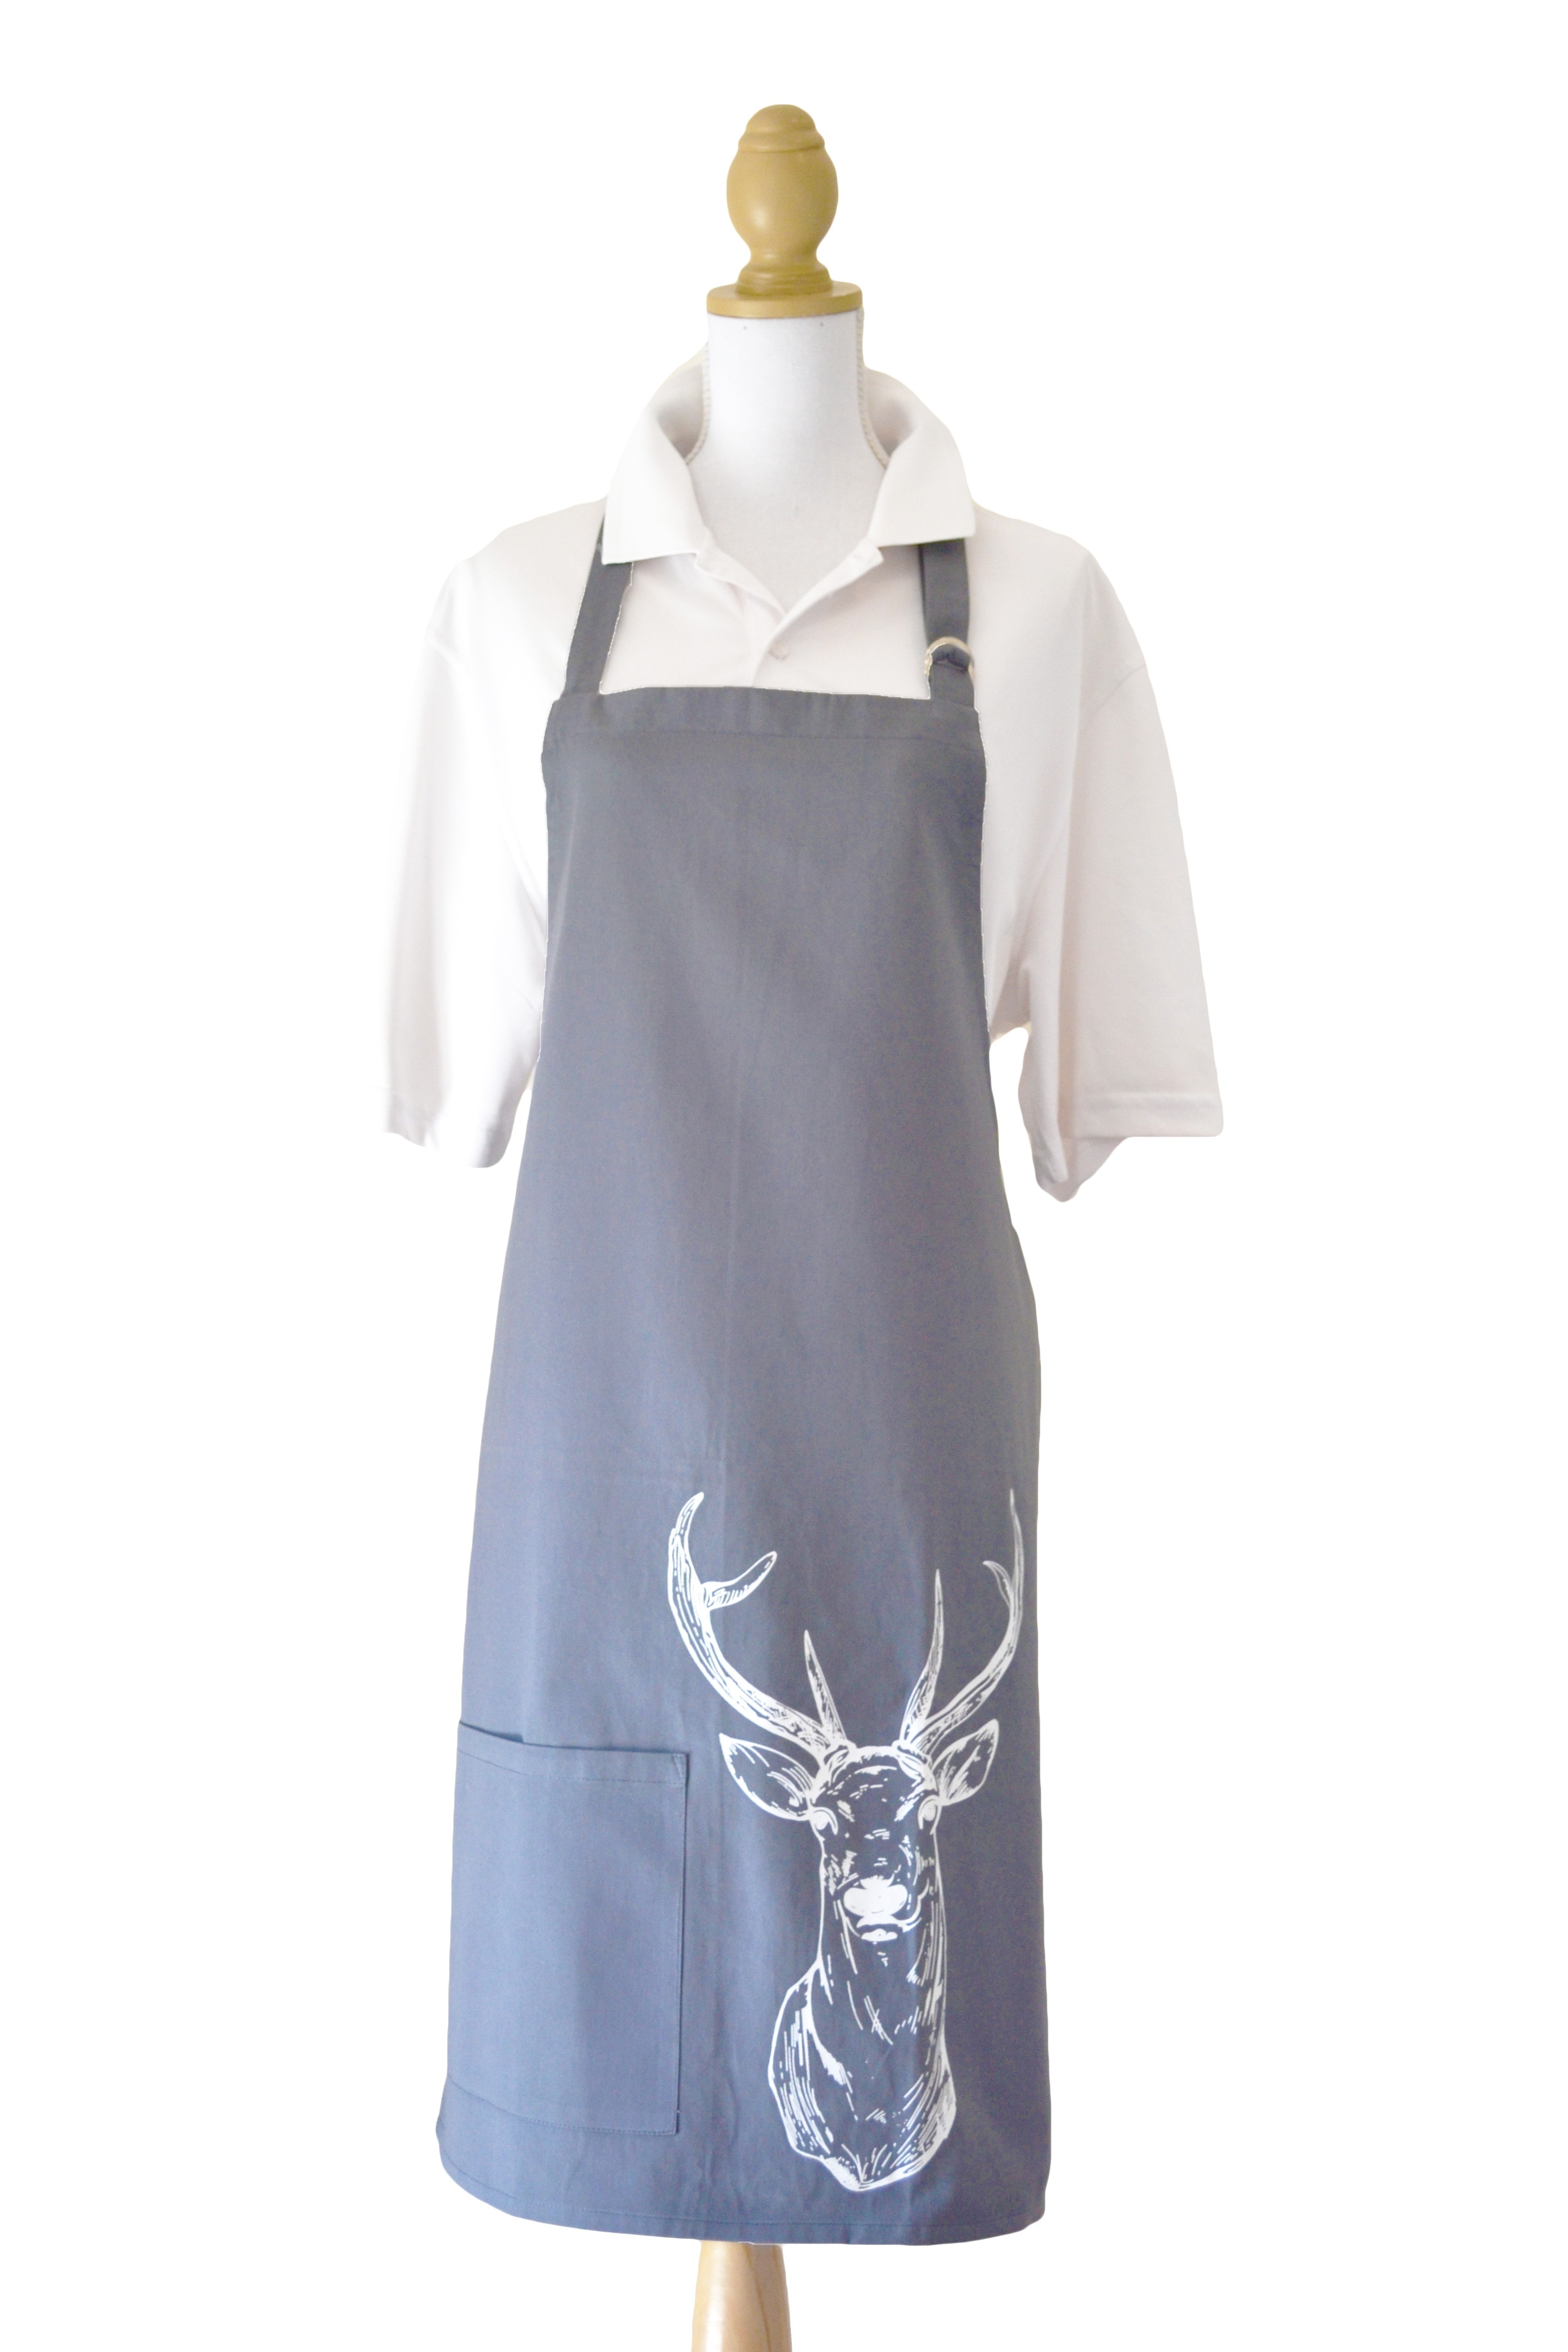 white polo shirt and grey stag apron outfit